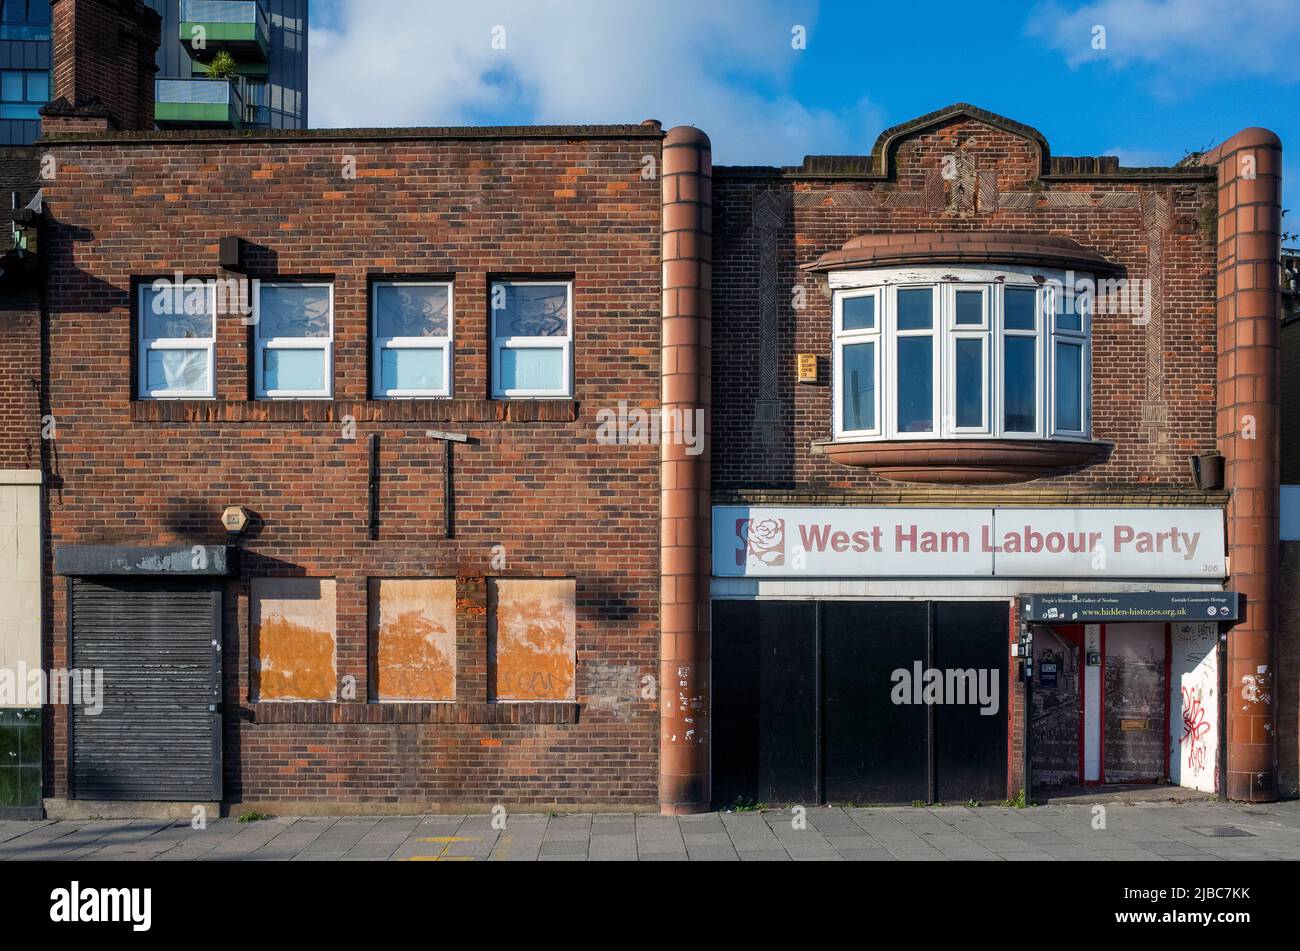 West Ham Labour Party, closed building on Stratford high street, Newham, East London - 2021. Stock Photo